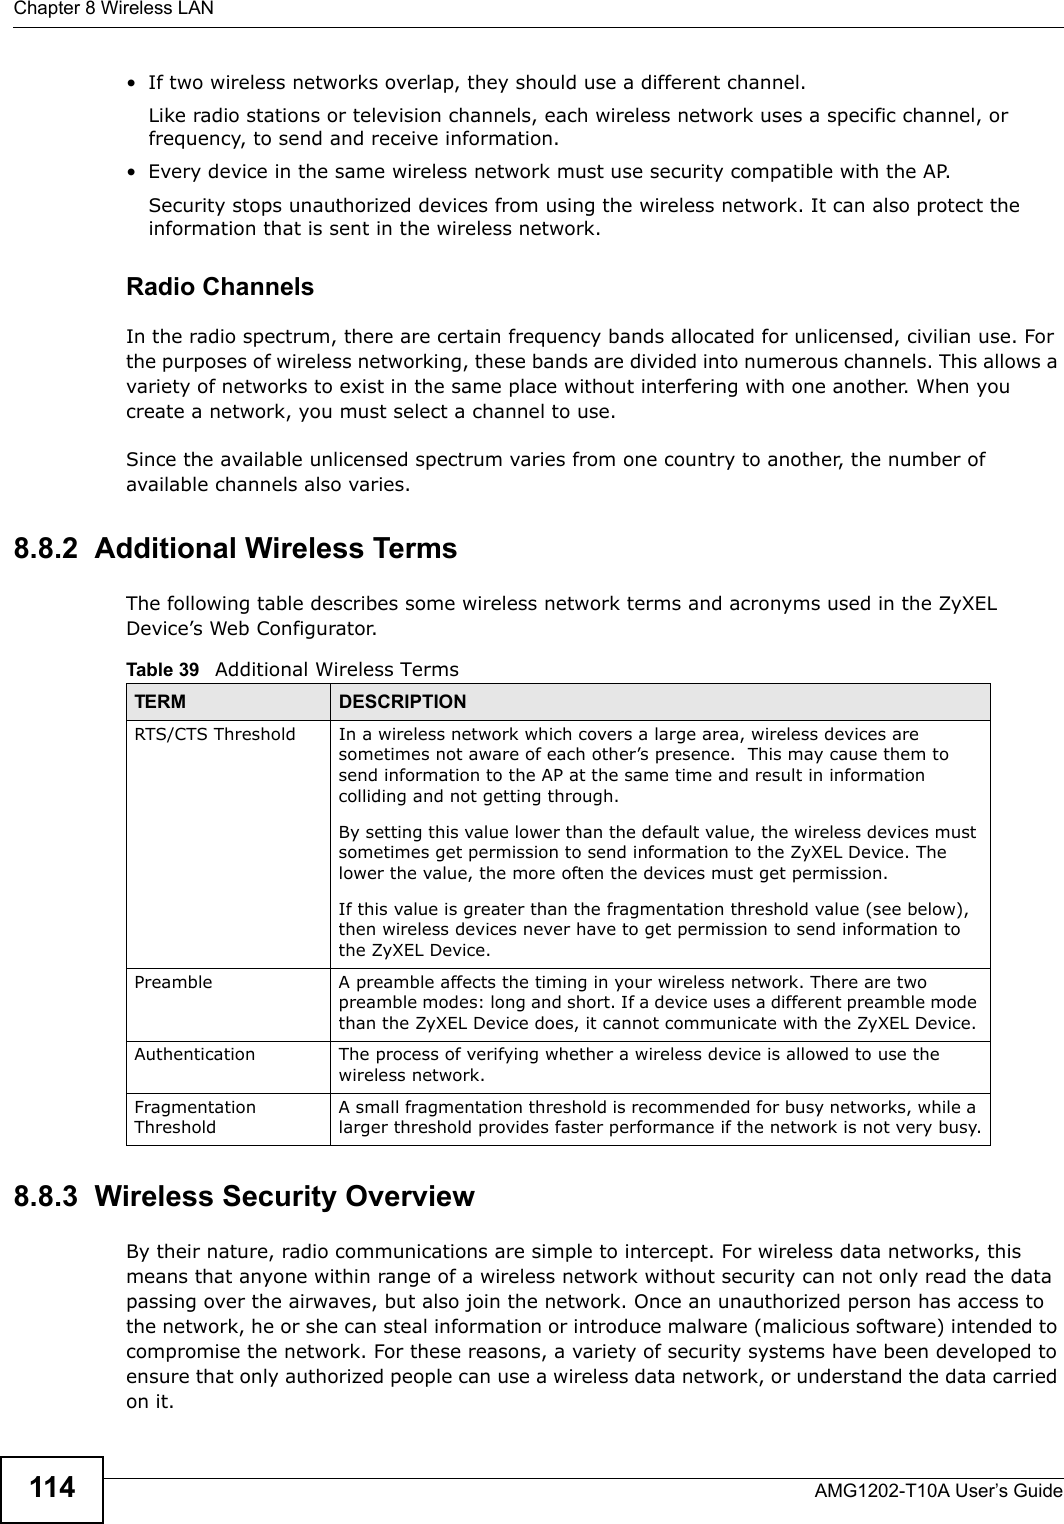 Chapter 8 Wireless LANAMG1202-T10A User’s Guide114• If two wireless networks overlap, they should use a different channel.Like radio stations or television channels, each wireless network uses a specific channel, or frequency, to send and receive information.• Every device in the same wireless network must use security compatible with the AP.Security stops unauthorized devices from using the wireless network. It can also protect the information that is sent in the wireless network.Radio ChannelsIn the radio spectrum, there are certain frequency bands allocated for unlicensed, civilian use. For the purposes of wireless networking, these bands are divided into numerous channels. This allows a variety of networks to exist in the same place without interfering with one another. When you create a network, you must select a channel to use. Since the available unlicensed spectrum varies from one country to another, the number of available channels also varies. 8.8.2  Additional Wireless TermsThe following table describes some wireless network terms and acronyms used in the ZyXEL Device’s Web Configurator.8.8.3  Wireless Security OverviewBy their nature, radio communications are simple to intercept. For wireless data networks, this means that anyone within range of a wireless network without security can not only read the data passing over the airwaves, but also join the network. Once an unauthorized person has access to the network, he or she can steal information or introduce malware (malicious software) intended to compromise the network. For these reasons, a variety of security systems have been developed to ensure that only authorized people can use a wireless data network, or understand the data carried on it.Table 39   Additional Wireless TermsTERM DESCRIPTIONRTS/CTS Threshold In a wireless network which covers a large area, wireless devices are sometimes not aware of each other’s presence.  This may cause them to send information to the AP at the same time and result in information colliding and not getting through.By setting this value lower than the default value, the wireless devices must sometimes get permission to send information to the ZyXEL Device. The lower the value, the more often the devices must get permission.If this value is greater than the fragmentation threshold value (see below), then wireless devices never have to get permission to send information to the ZyXEL Device.Preamble A preamble affects the timing in your wireless network. There are two preamble modes: long and short. If a device uses a different preamble mode than the ZyXEL Device does, it cannot communicate with the ZyXEL Device.Authentication The process of verifying whether a wireless device is allowed to use the wireless network.Fragmentation ThresholdA small fragmentation threshold is recommended for busy networks, while a larger threshold provides faster performance if the network is not very busy.